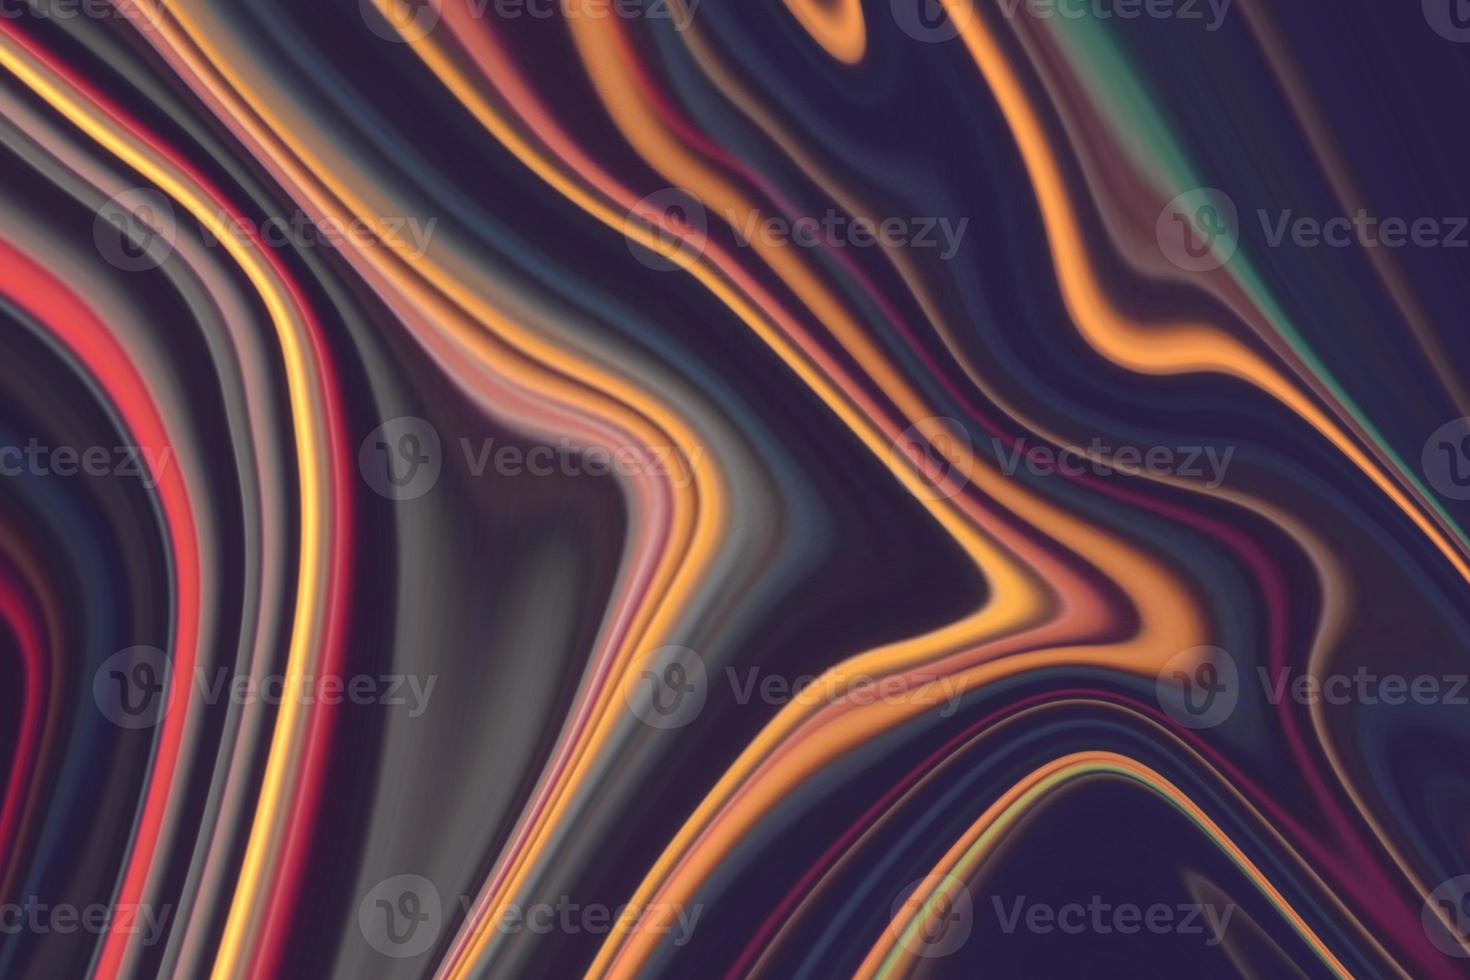 Colorful abstract pattern with a wavy background design photo